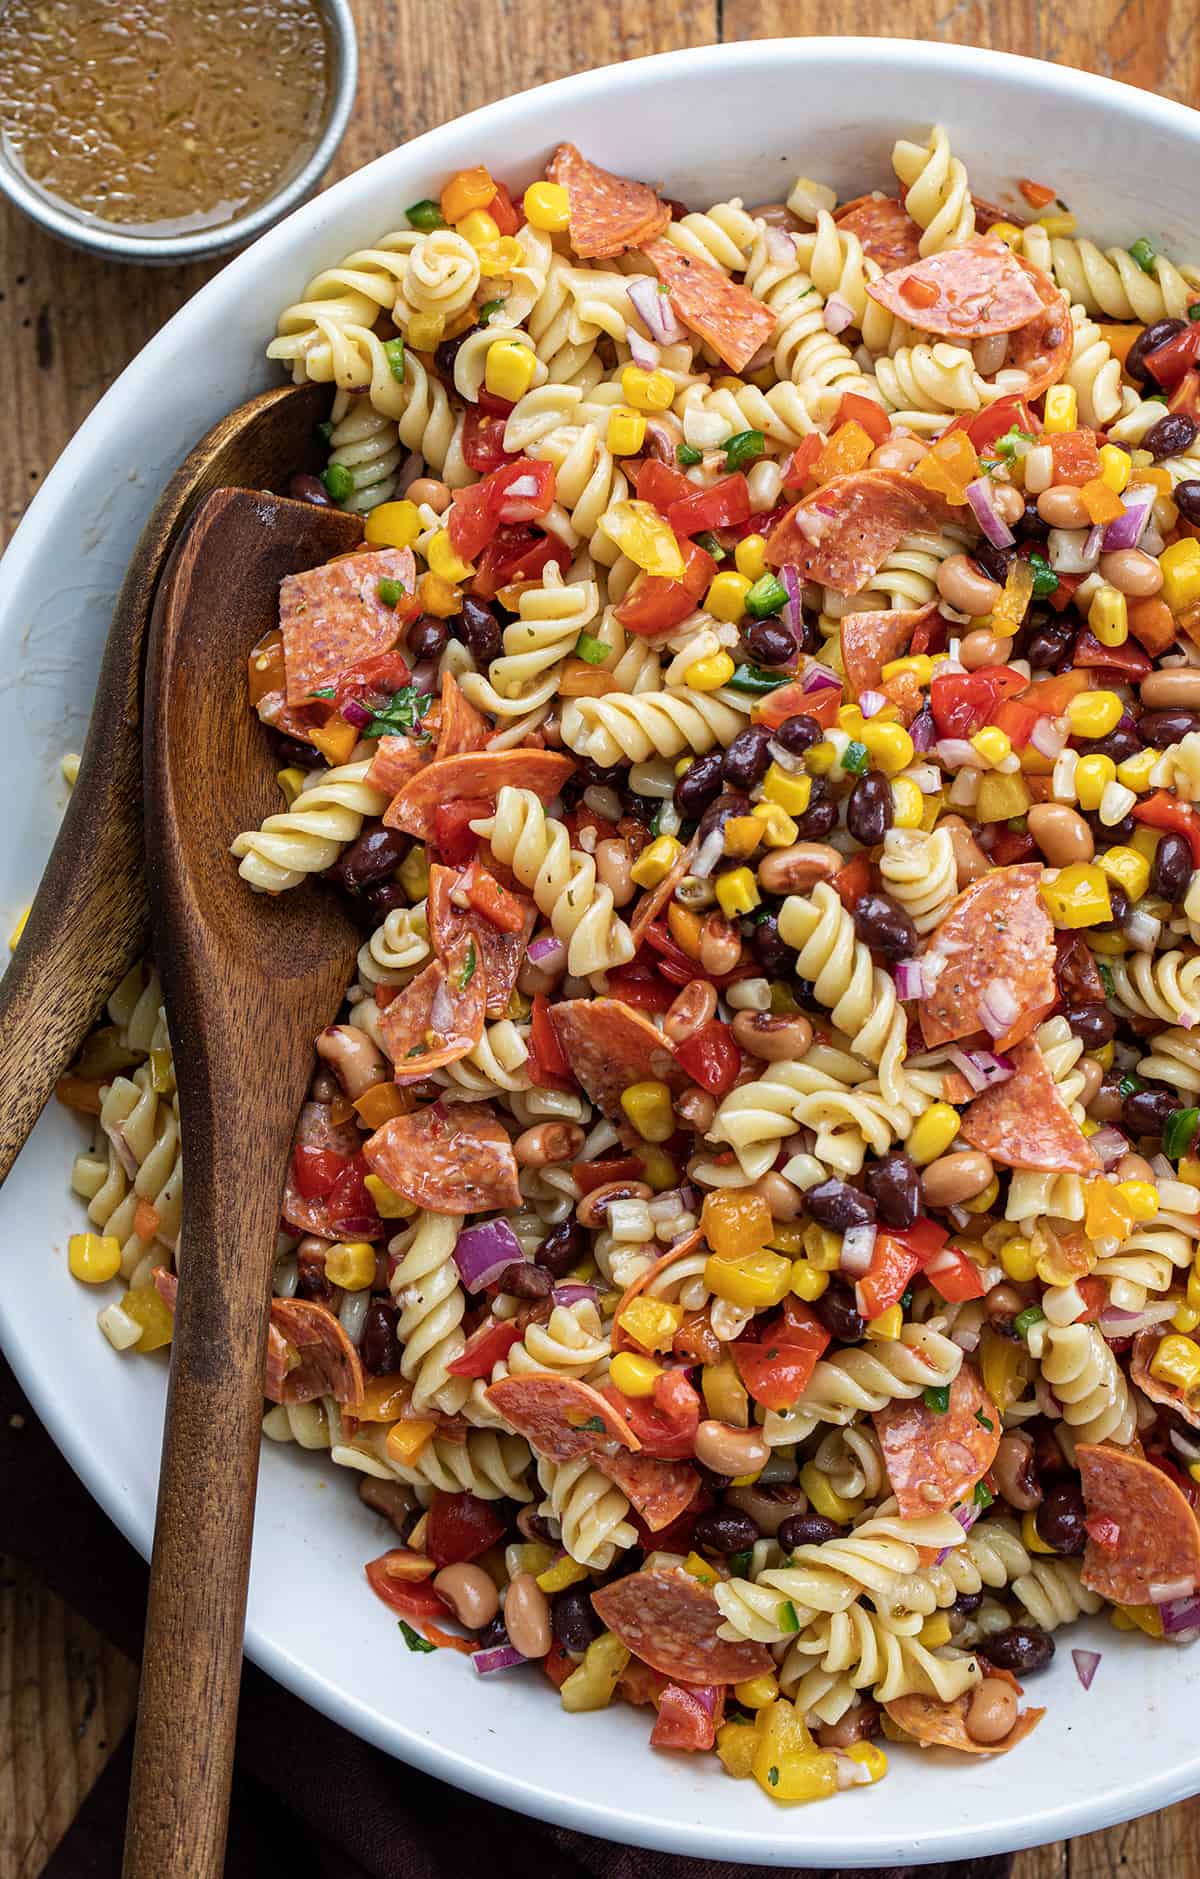 Bowl of Cowboy Caviar Pasta Salad with Wooden spoons Tucked in the Side.